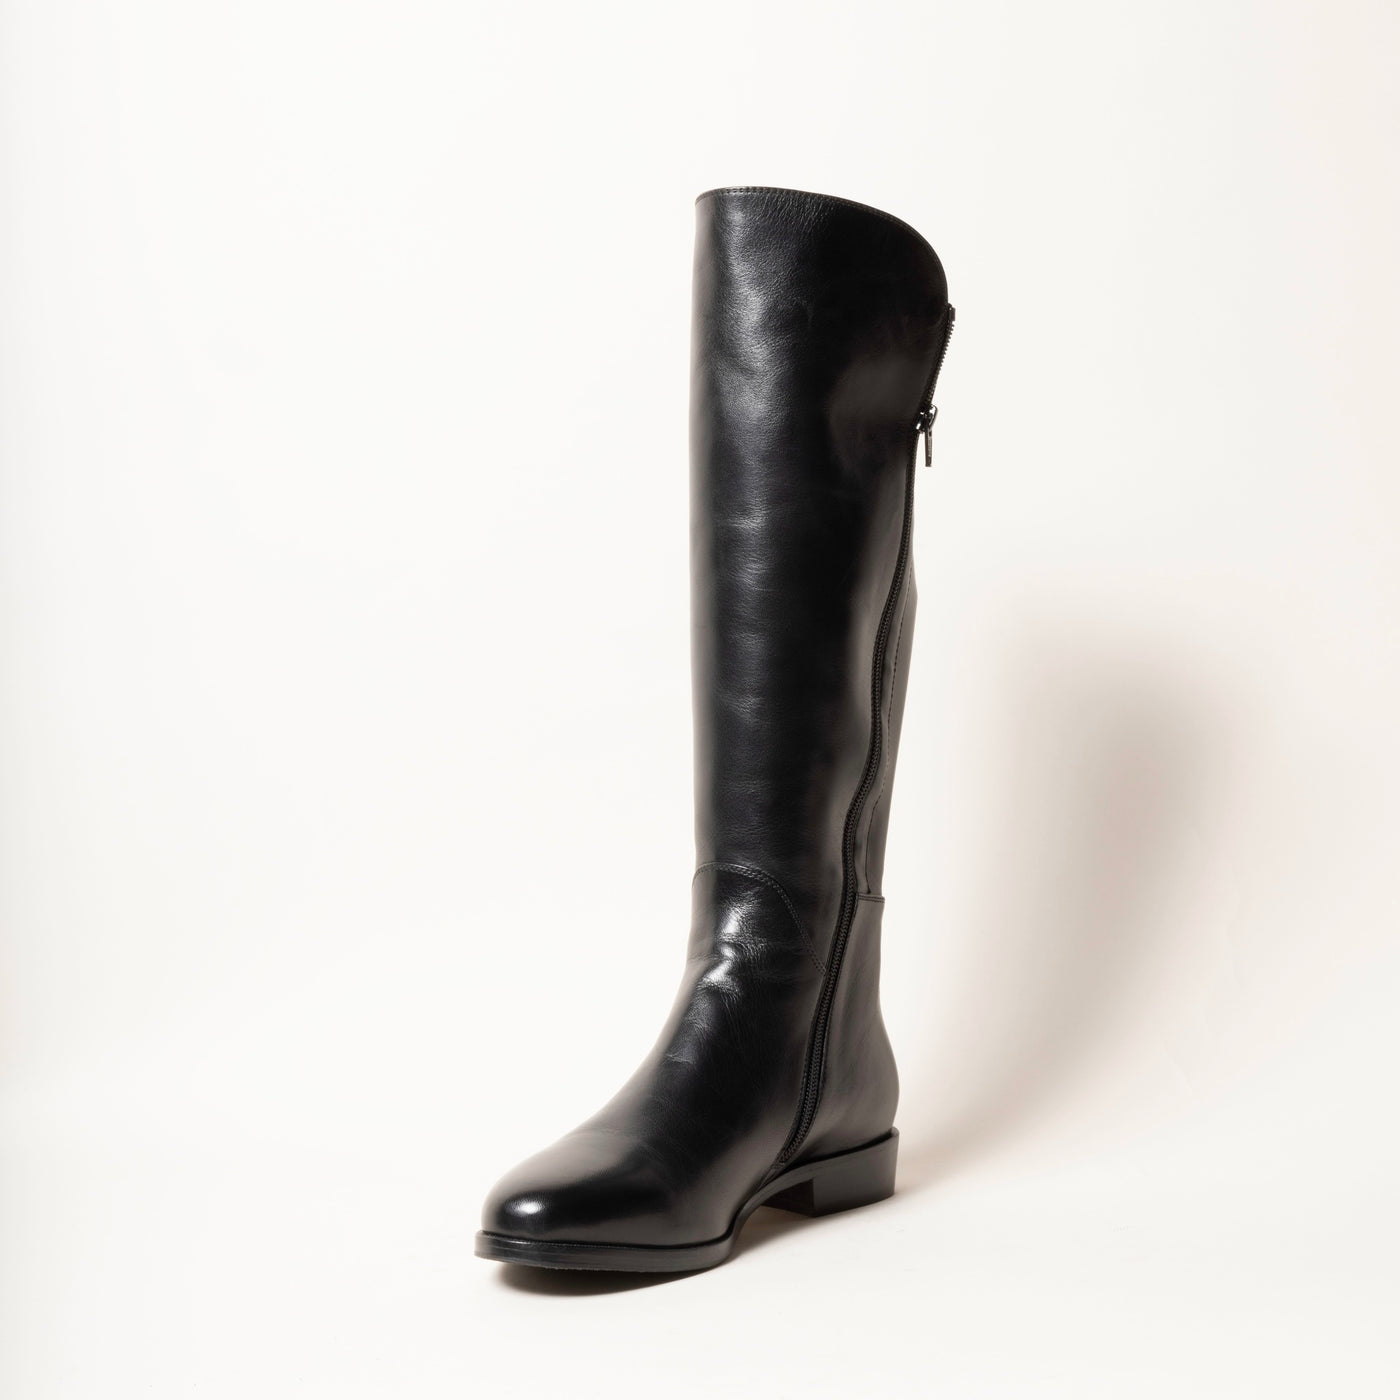 Shearling-lined Boots in Black Leather